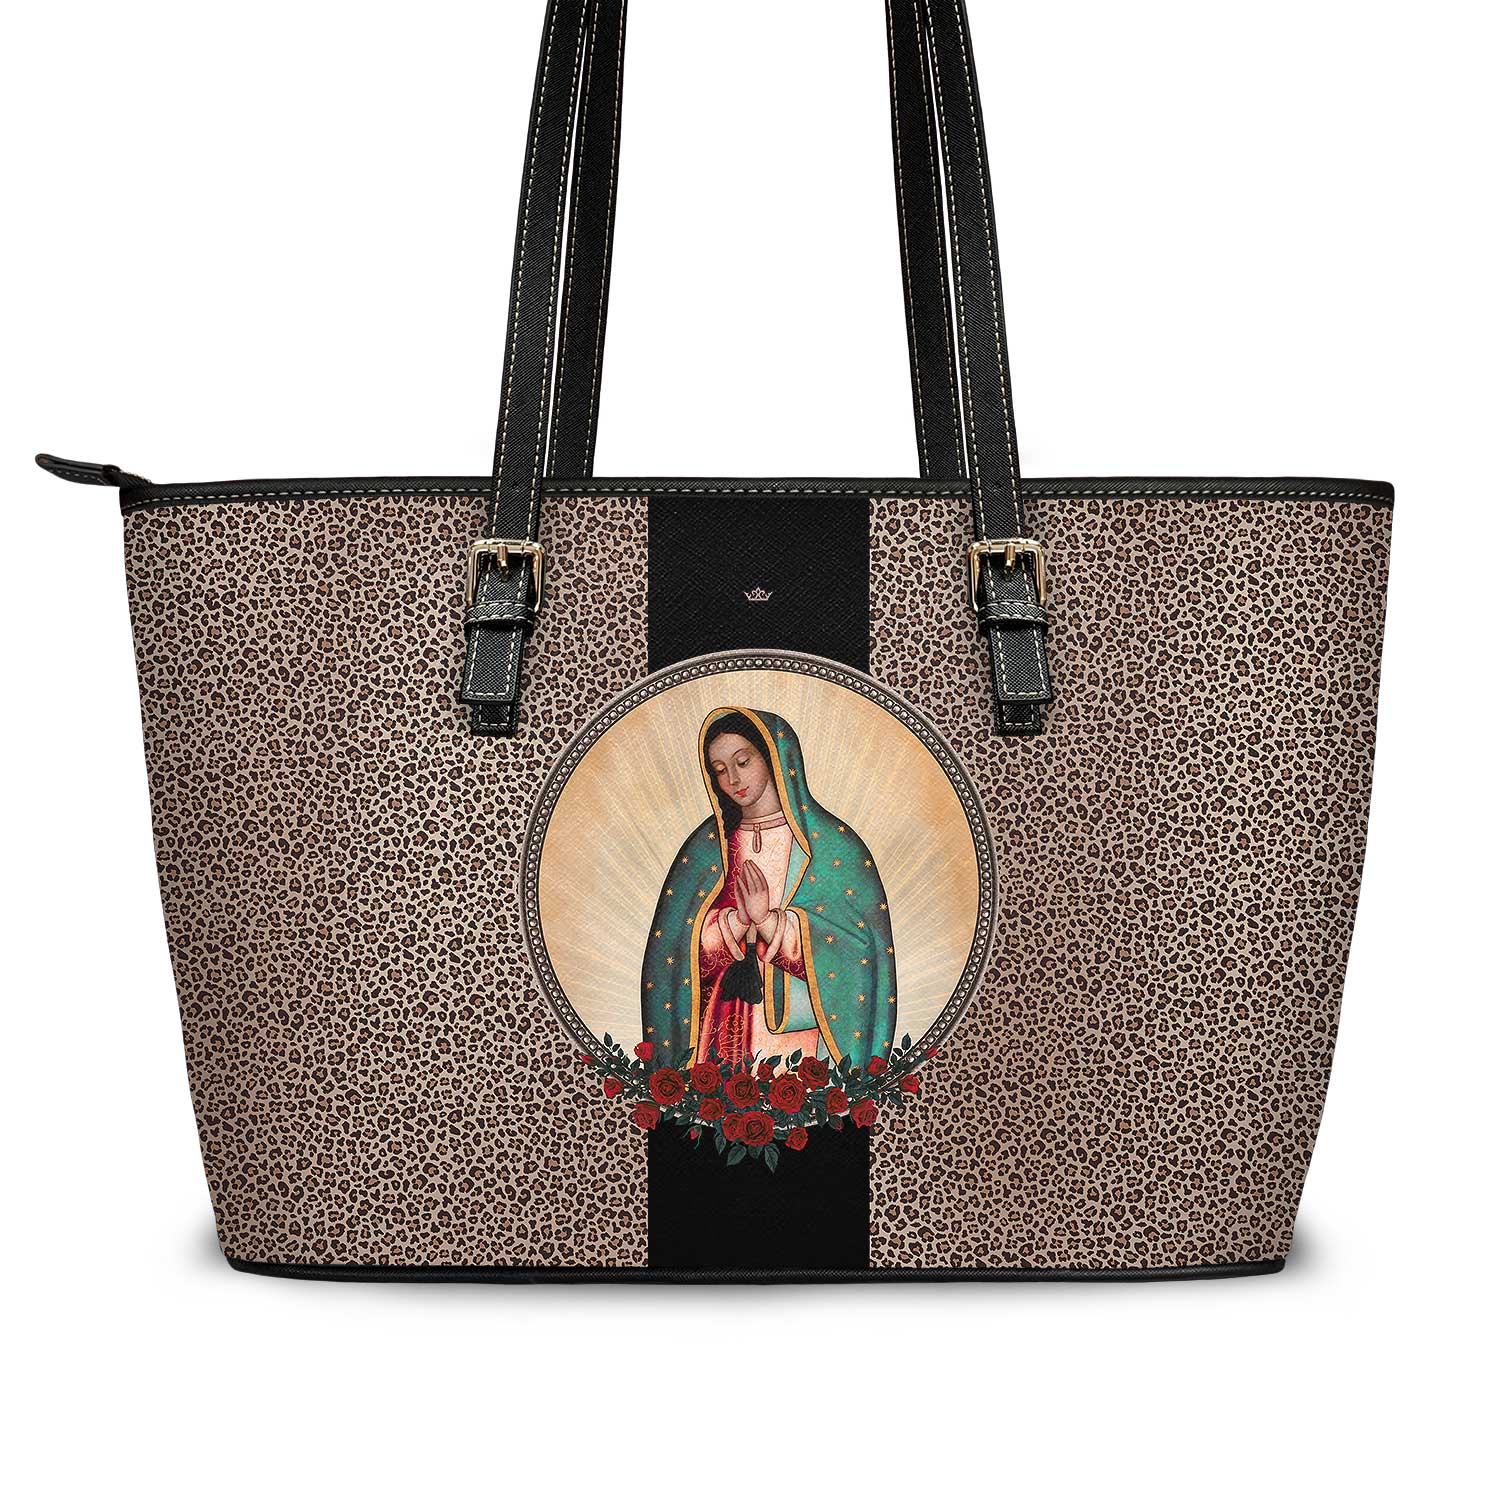 Our Lady of Guadalupe Tote Bag (Leopard) - VENXARA®